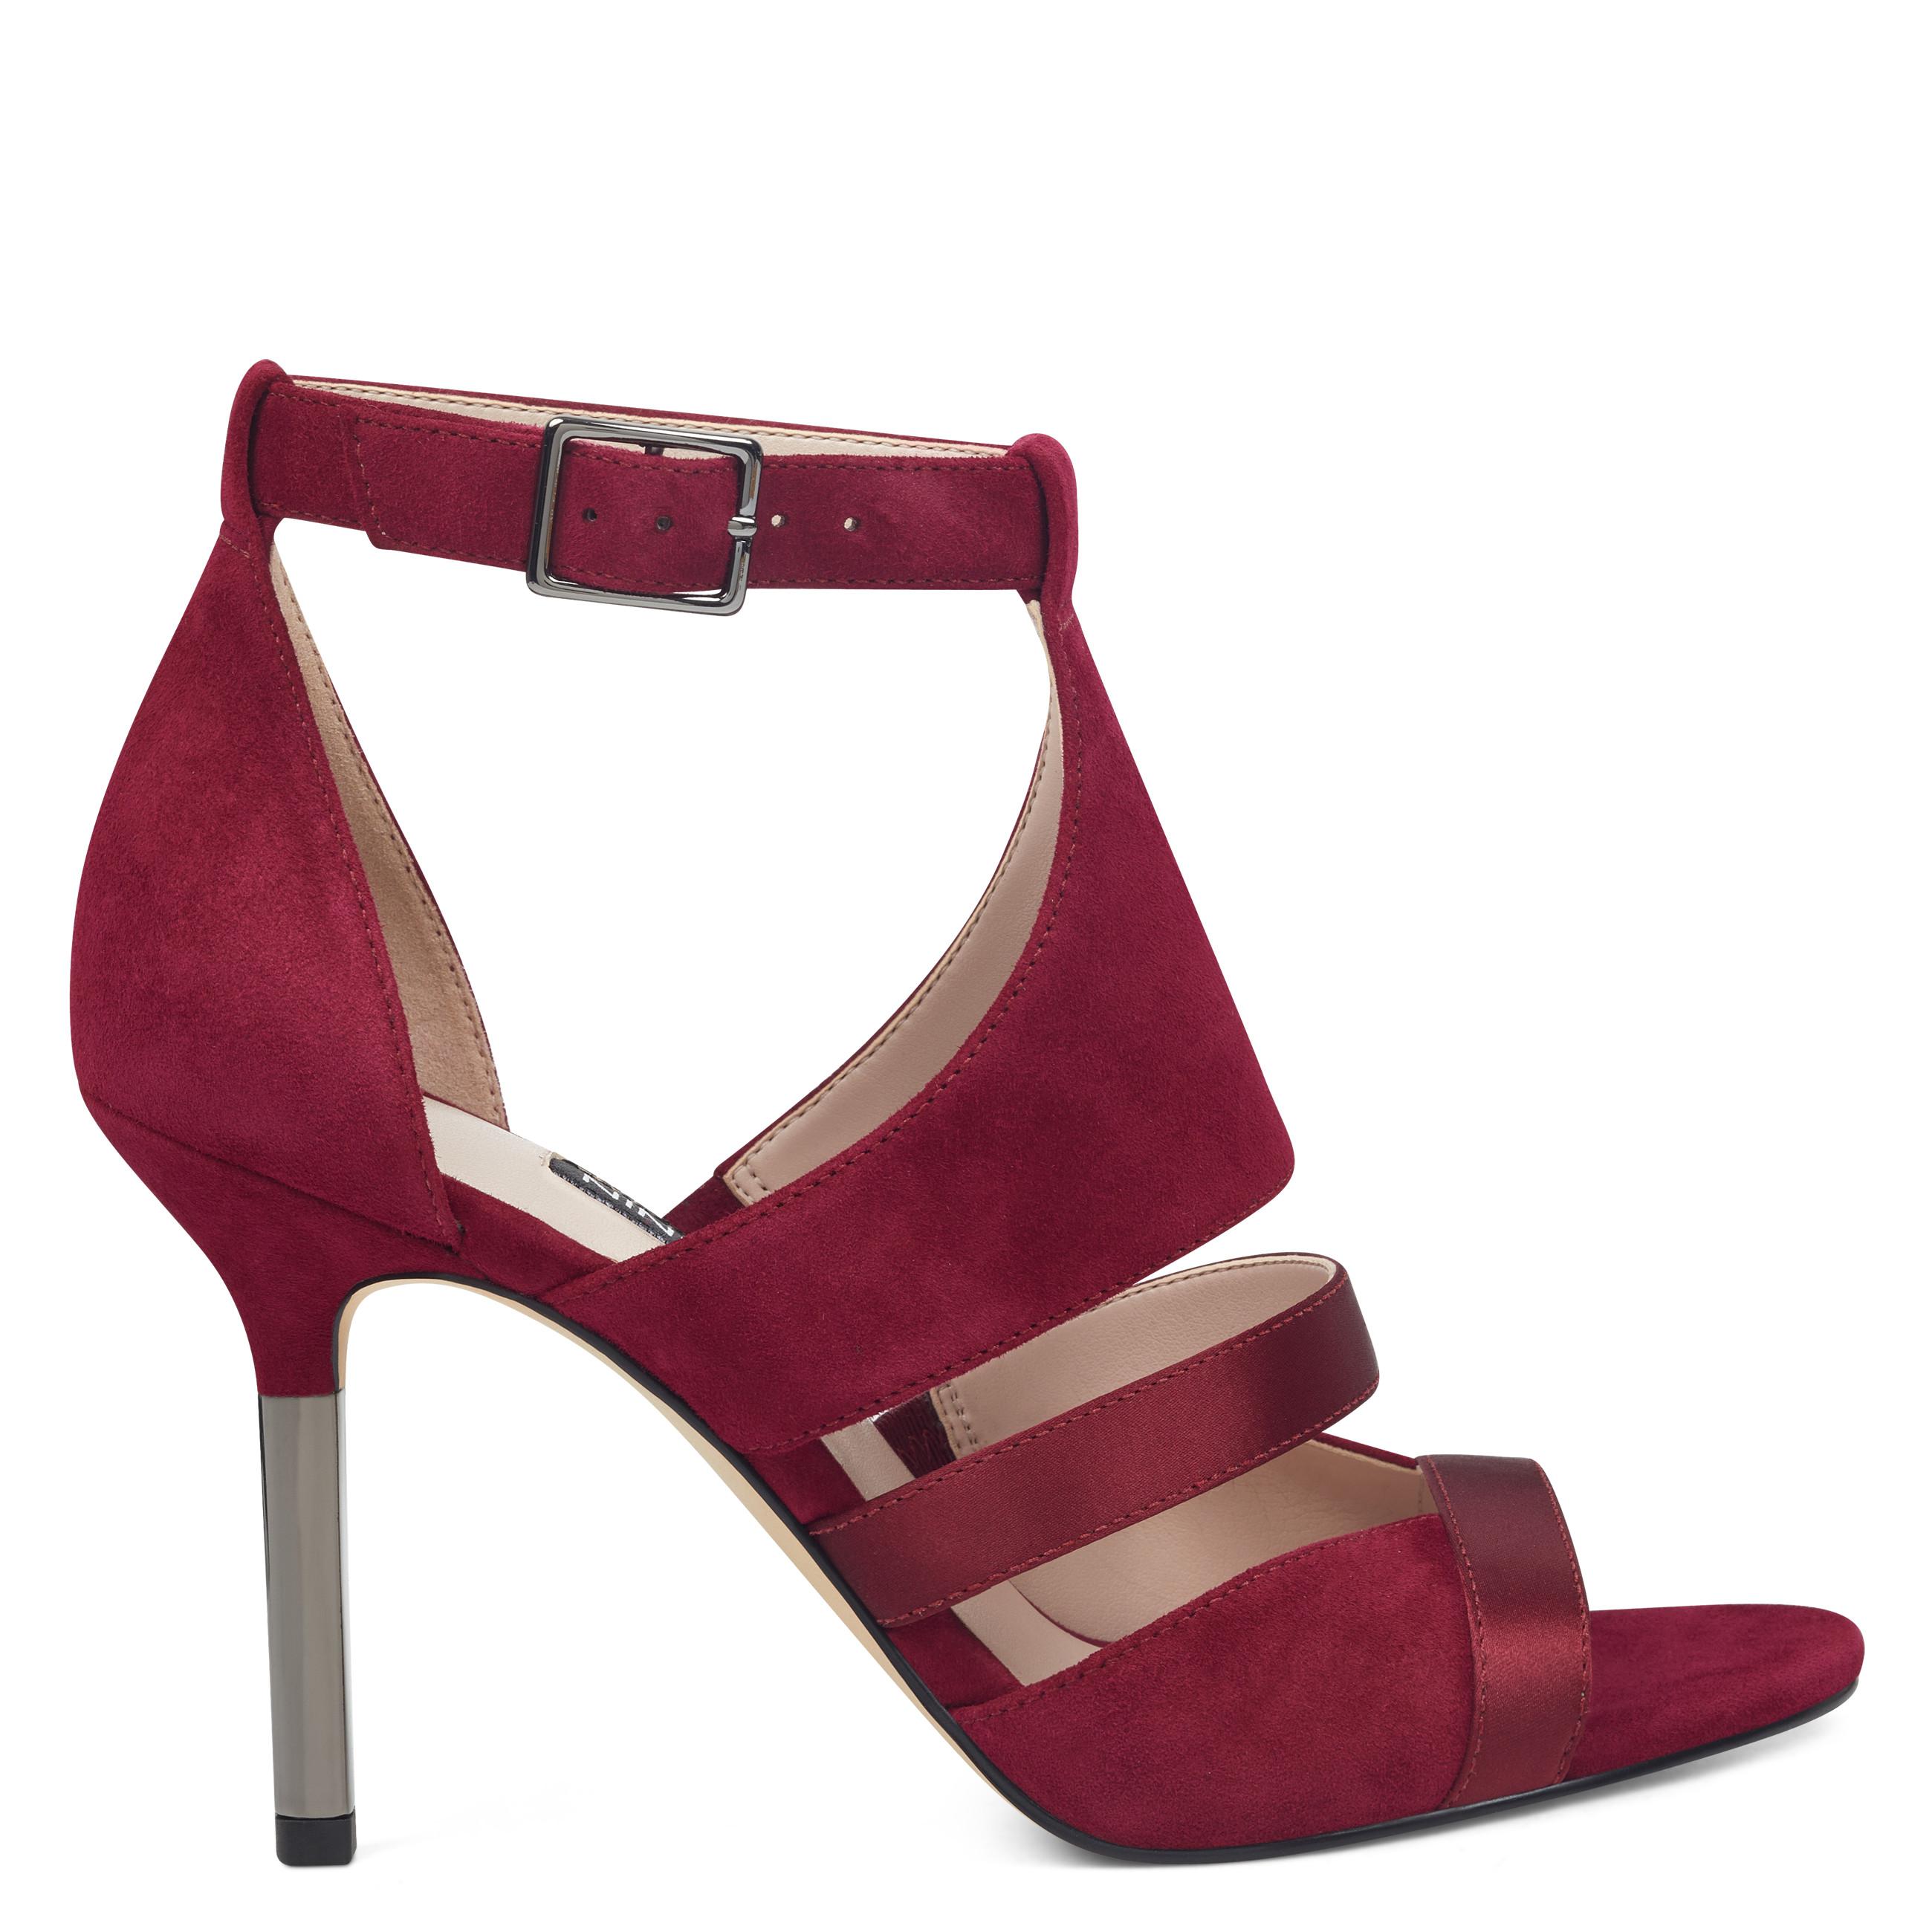 Nine West Brianna Caged Sandals in Red - Lyst